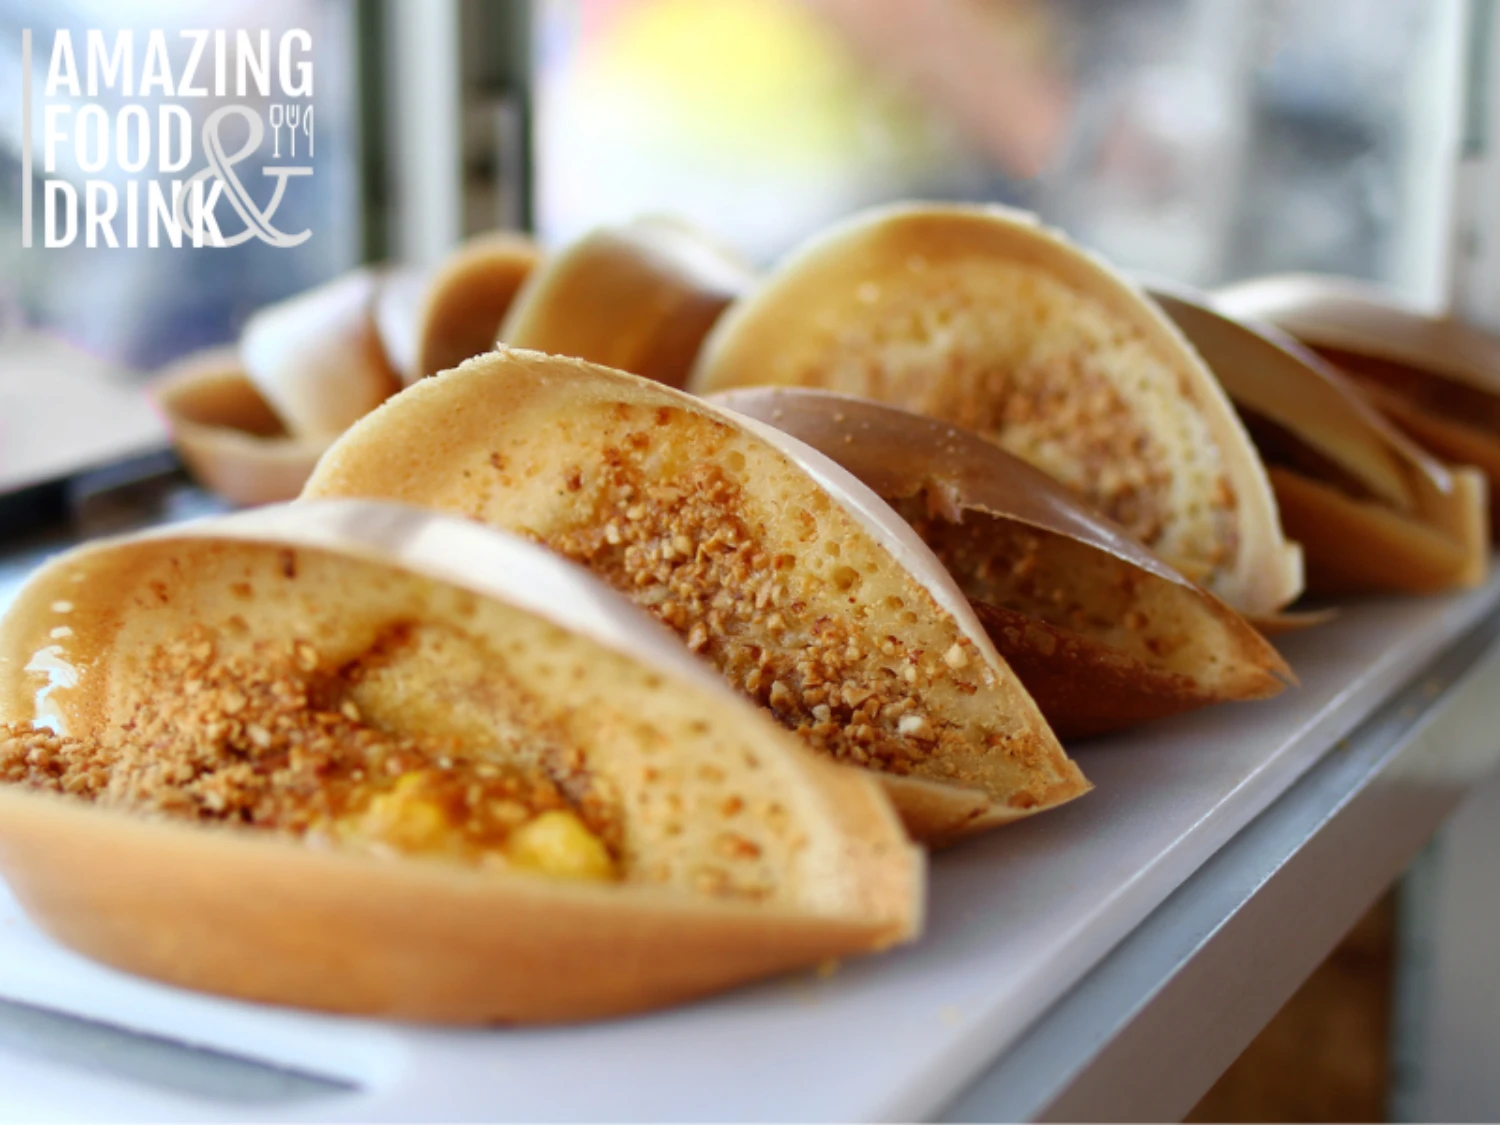 Apam balik, another version of pancake, sweet crispy filled with peanuts, sugar and sweet corn. Delicious Malay street food, Malaysian snack, Asian cuisine.

